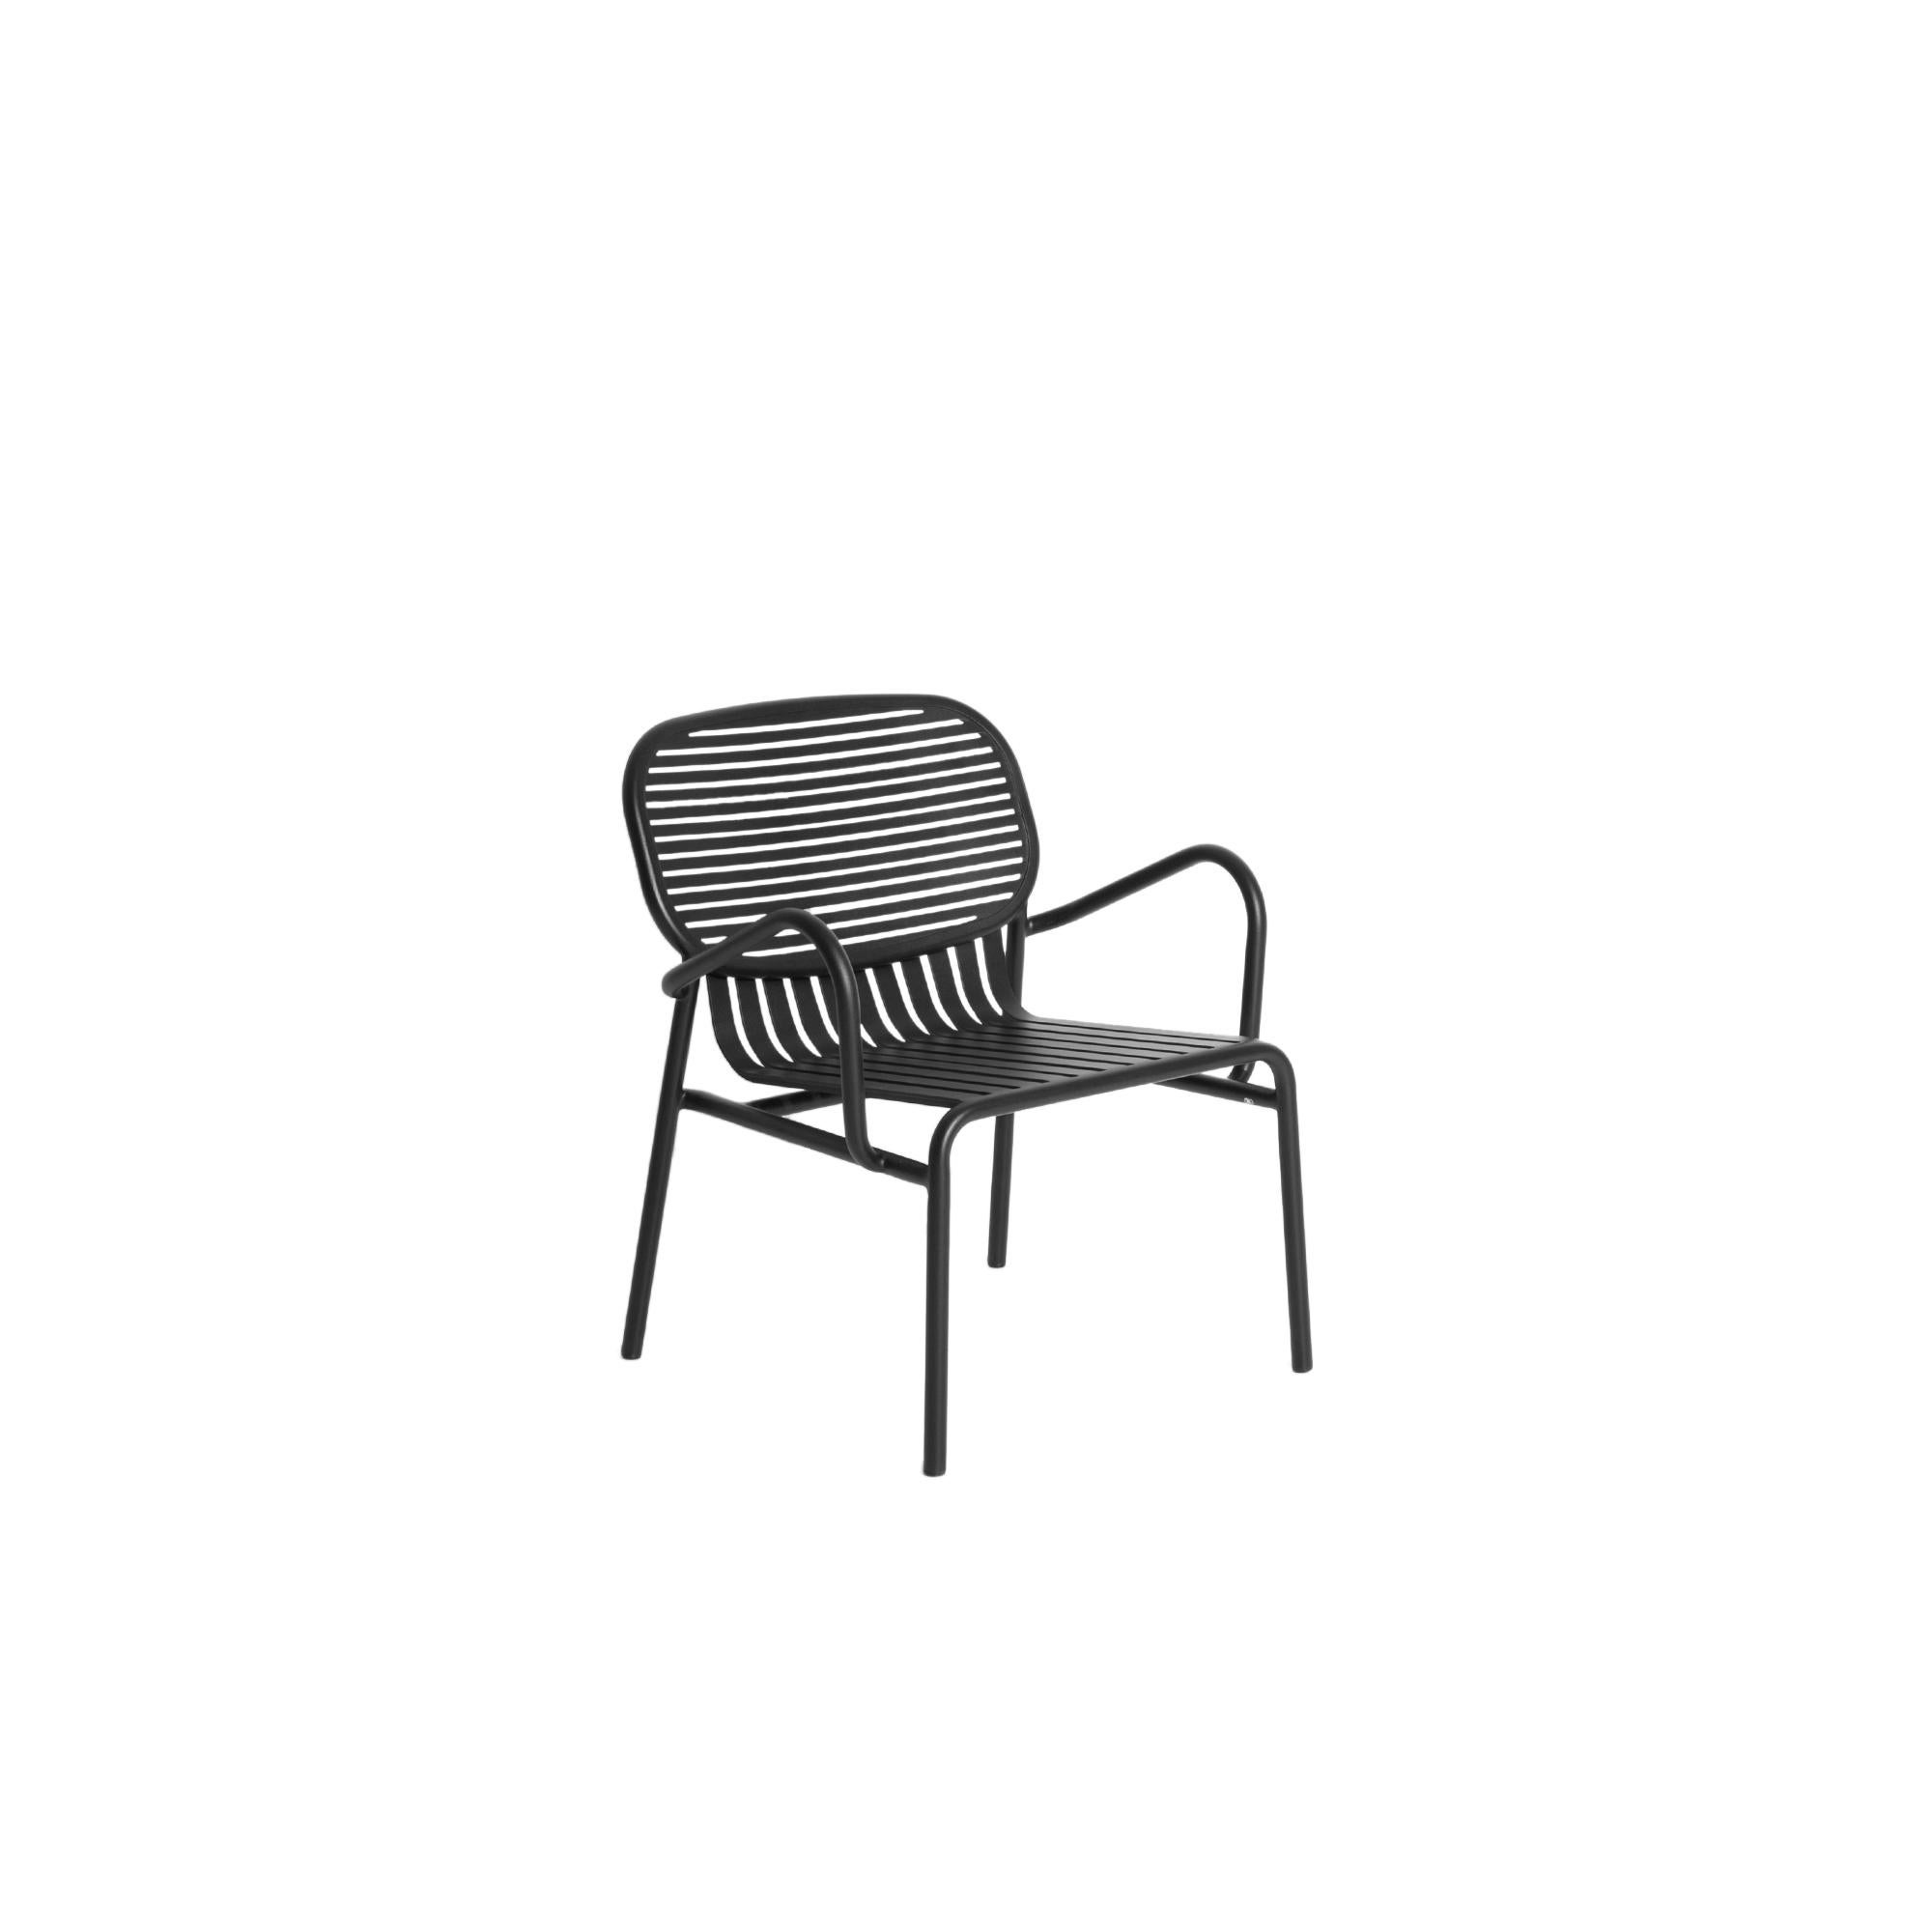 Petite Friture Week-End Armchair in Black Aluminium by Studio BrichetZiegler, 2017

The week-end collection is a full range of outdoor furniture, in aluminium grained epoxy paint, matt finish, that includes 18 functions and 8 colours for the